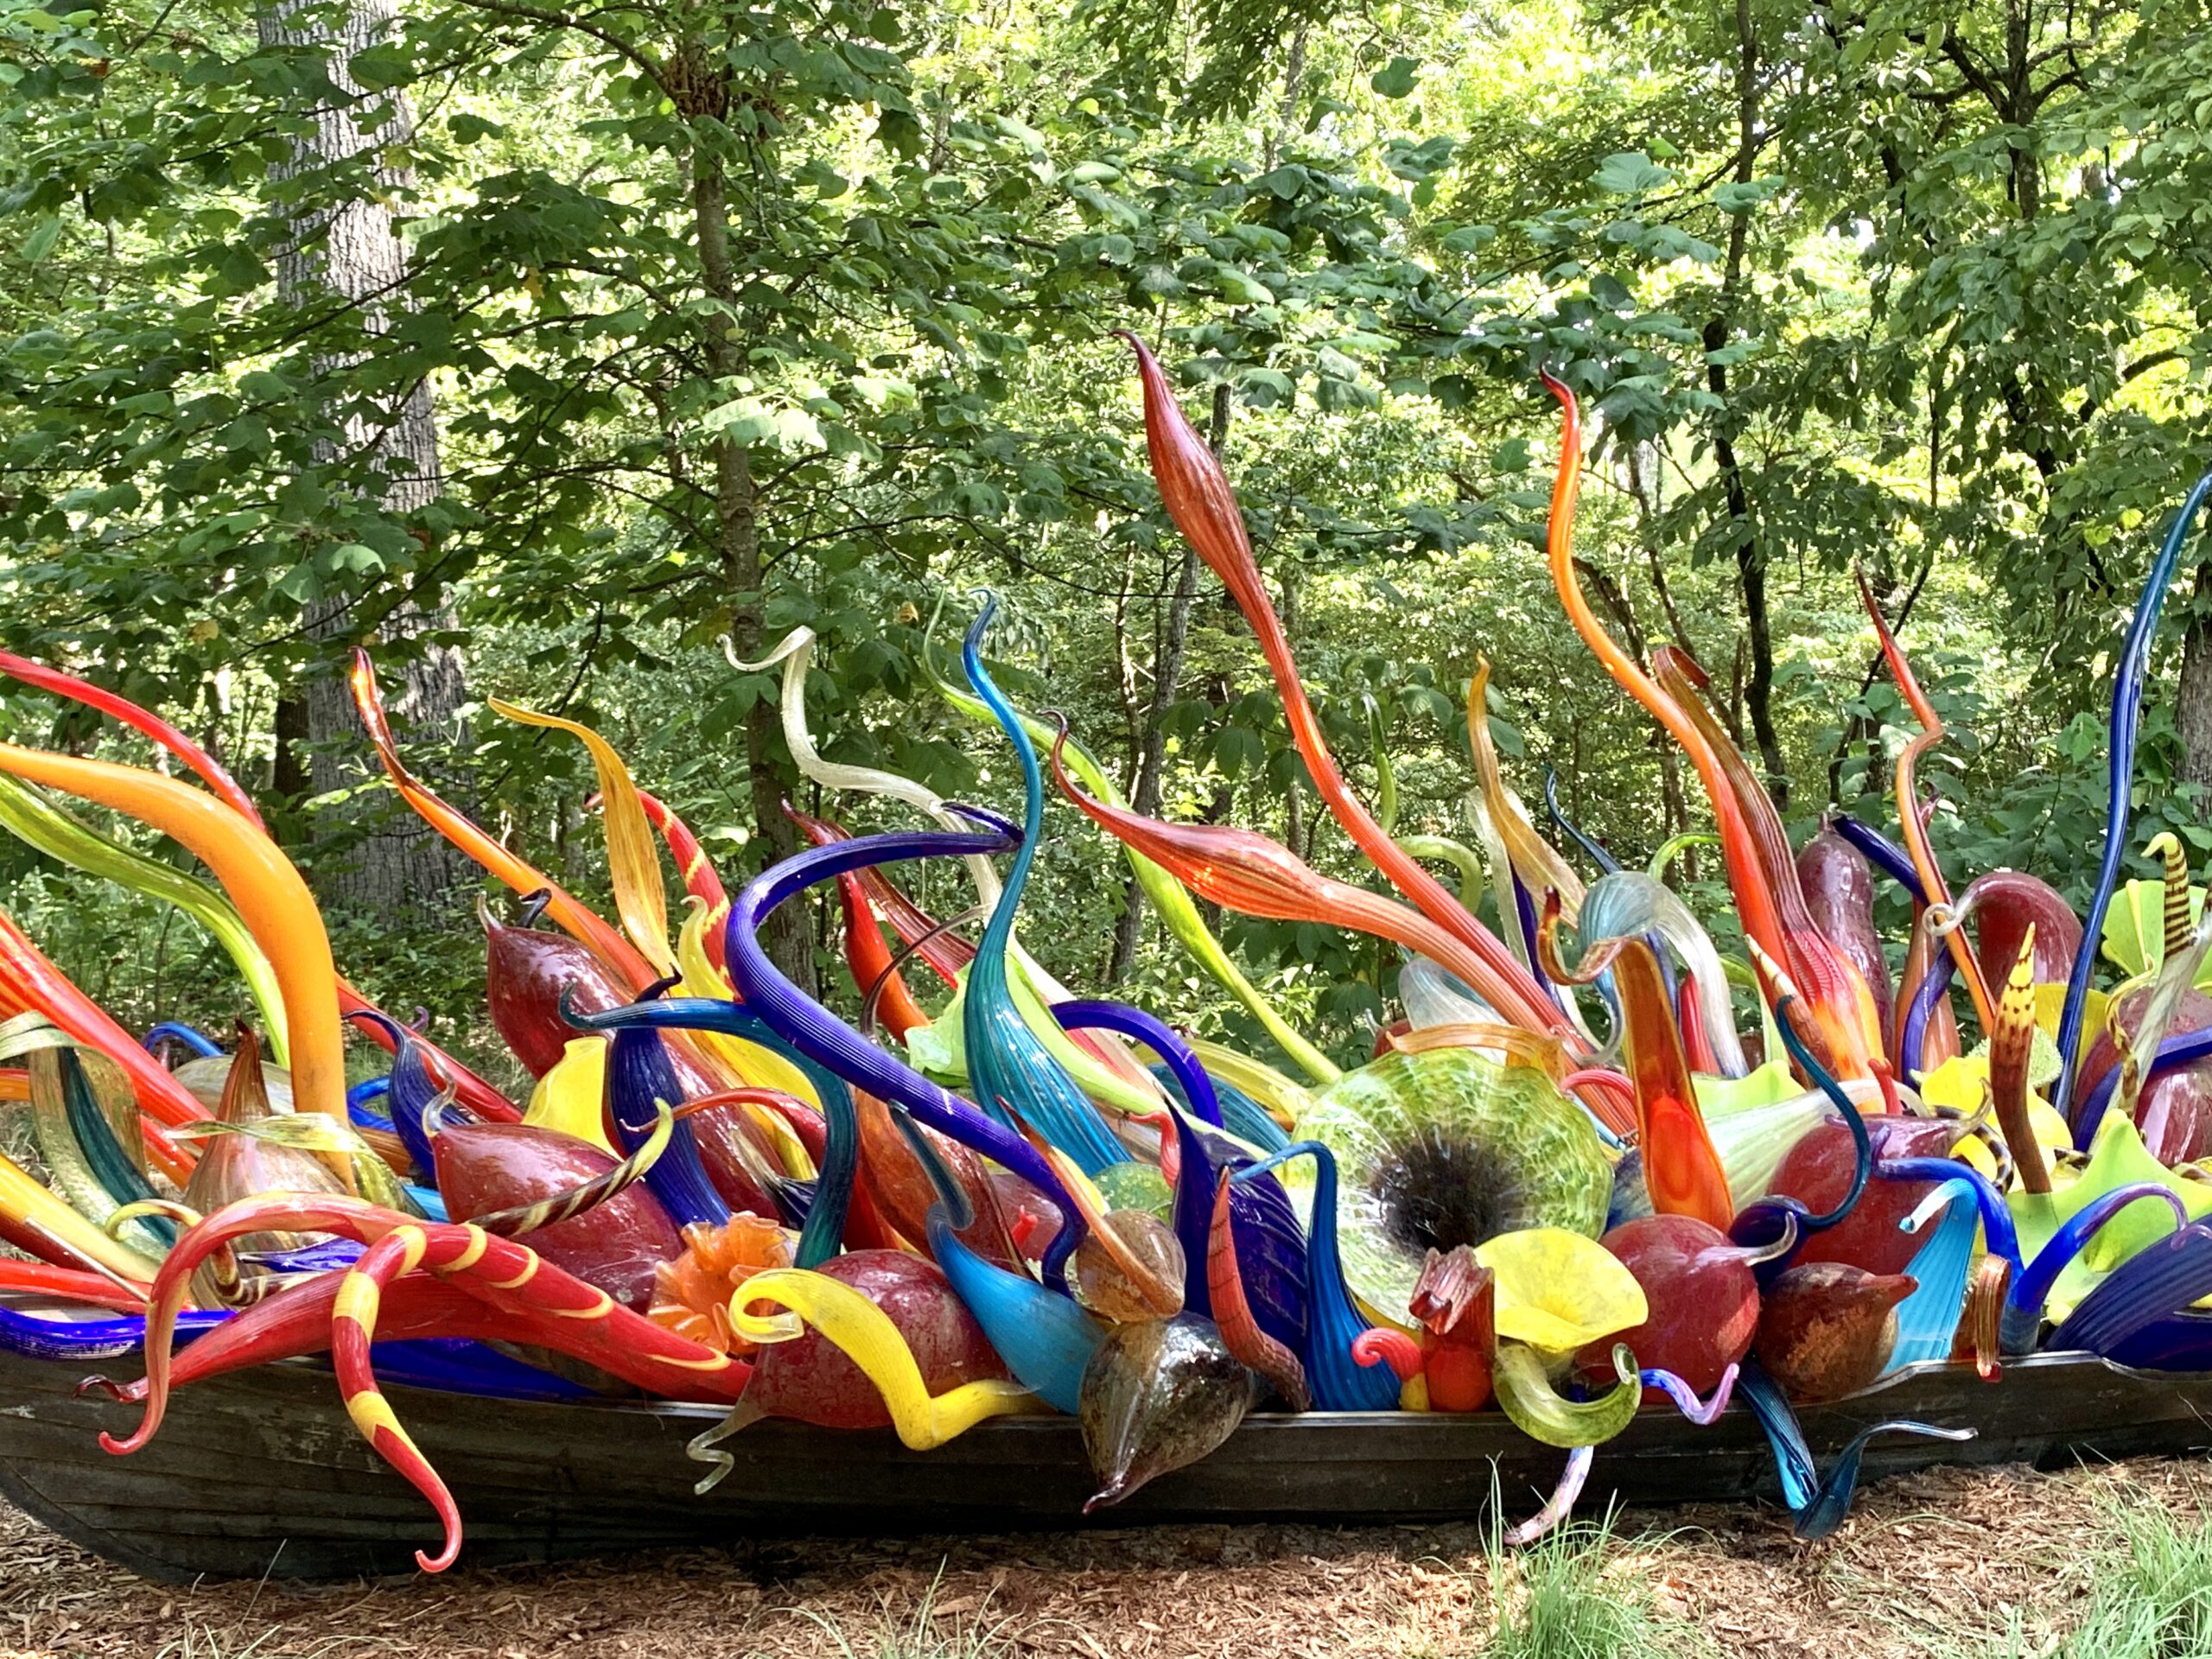 Chihuly glass sculpture outdoors at Crystal Bridges Museum of American Art